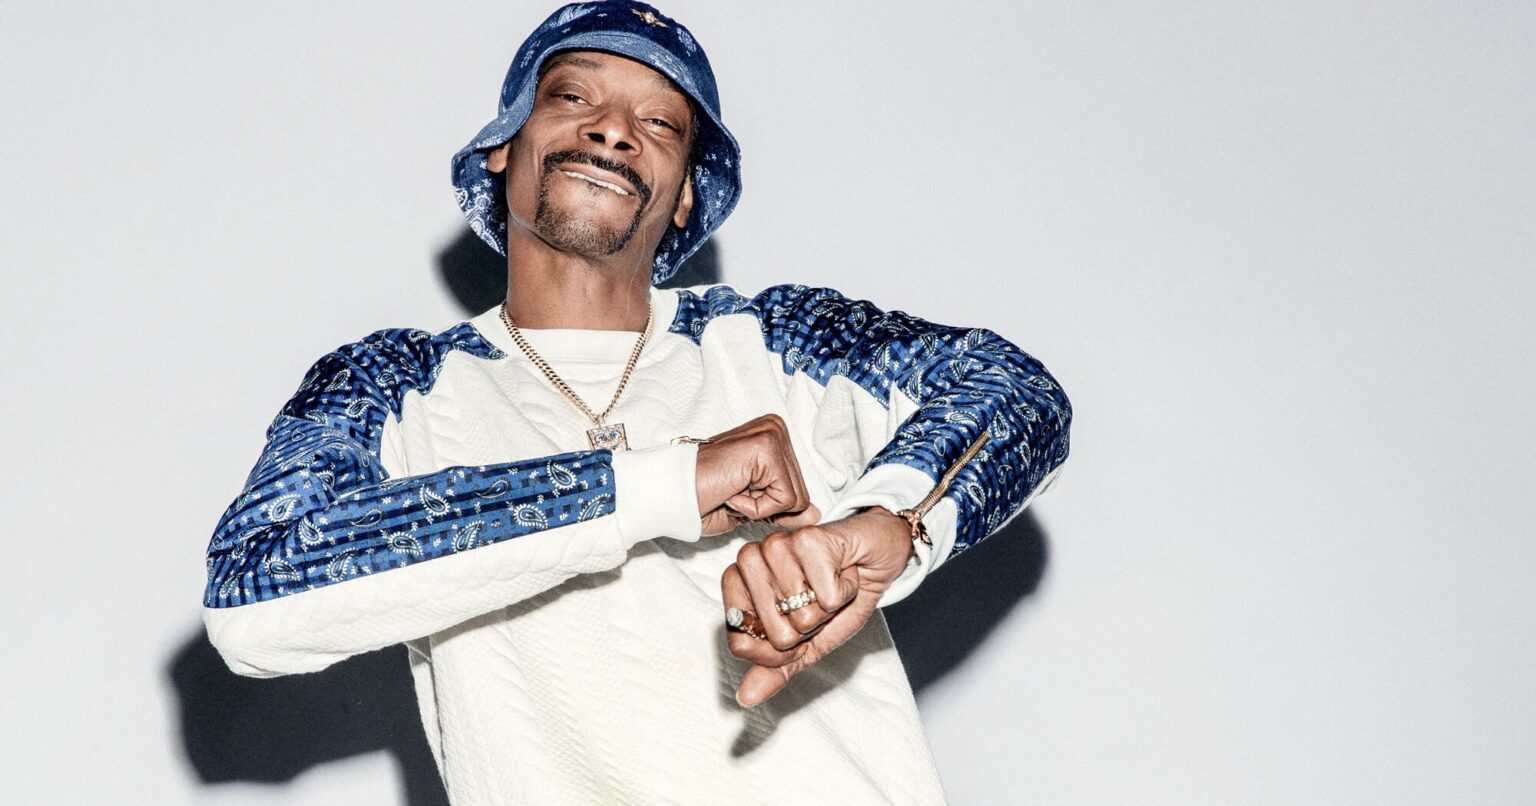 Fans of young Snoop Dogg would be shocked to see him today. Find out when and why Snoop gave up his gangsta lifestyle.